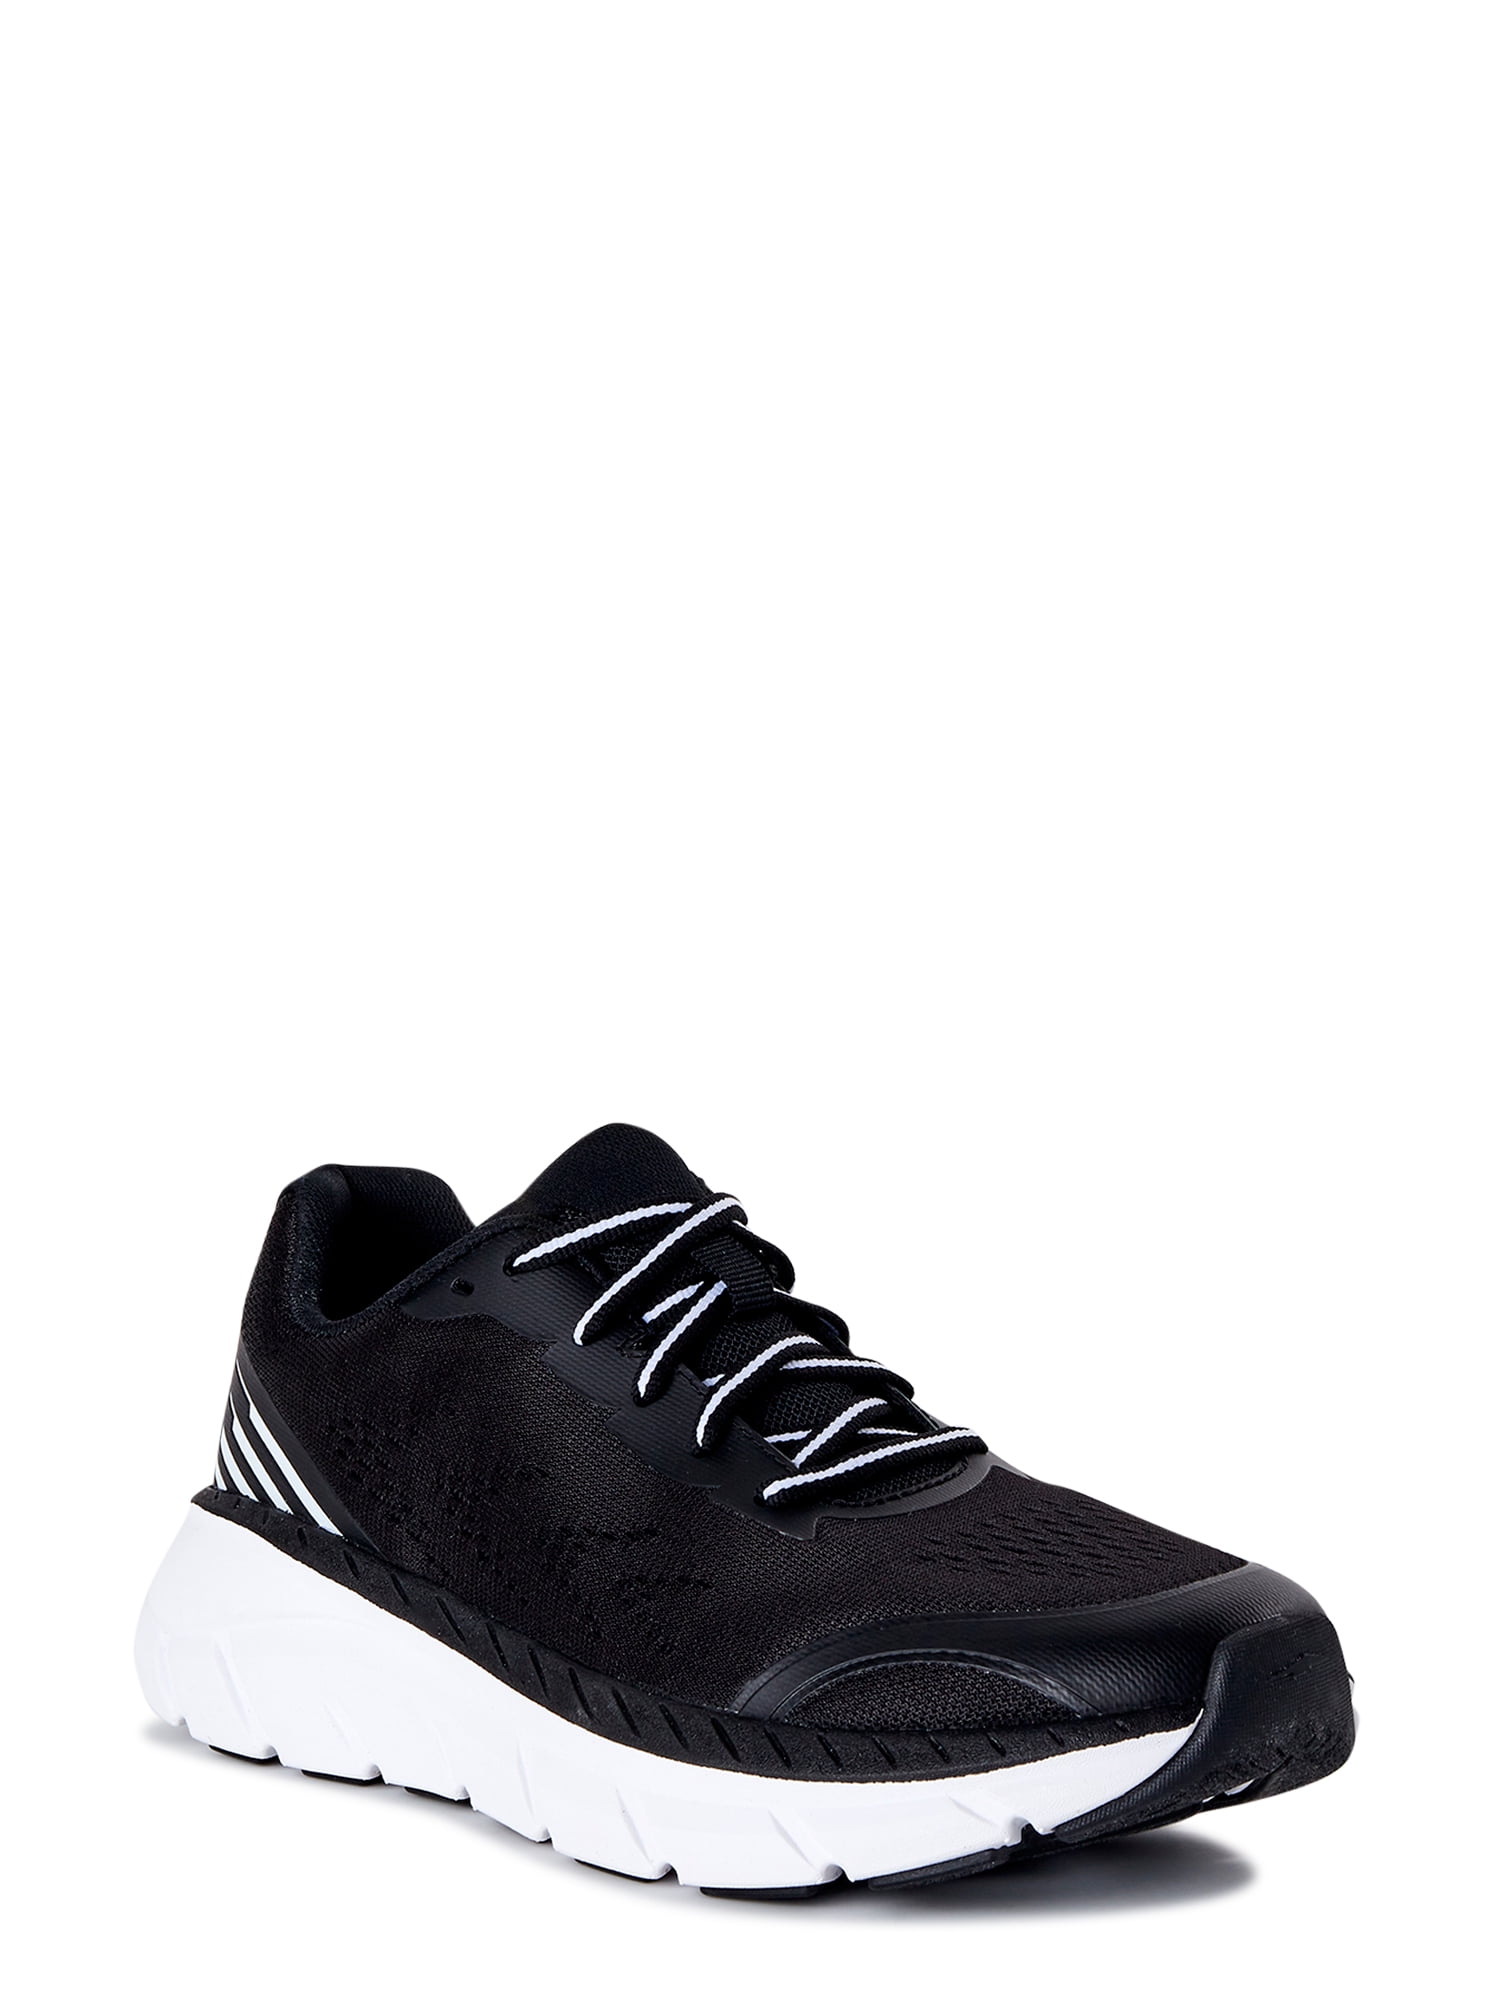 Avia Women's Hightail Athletic Sneaker (Wide Width Available)